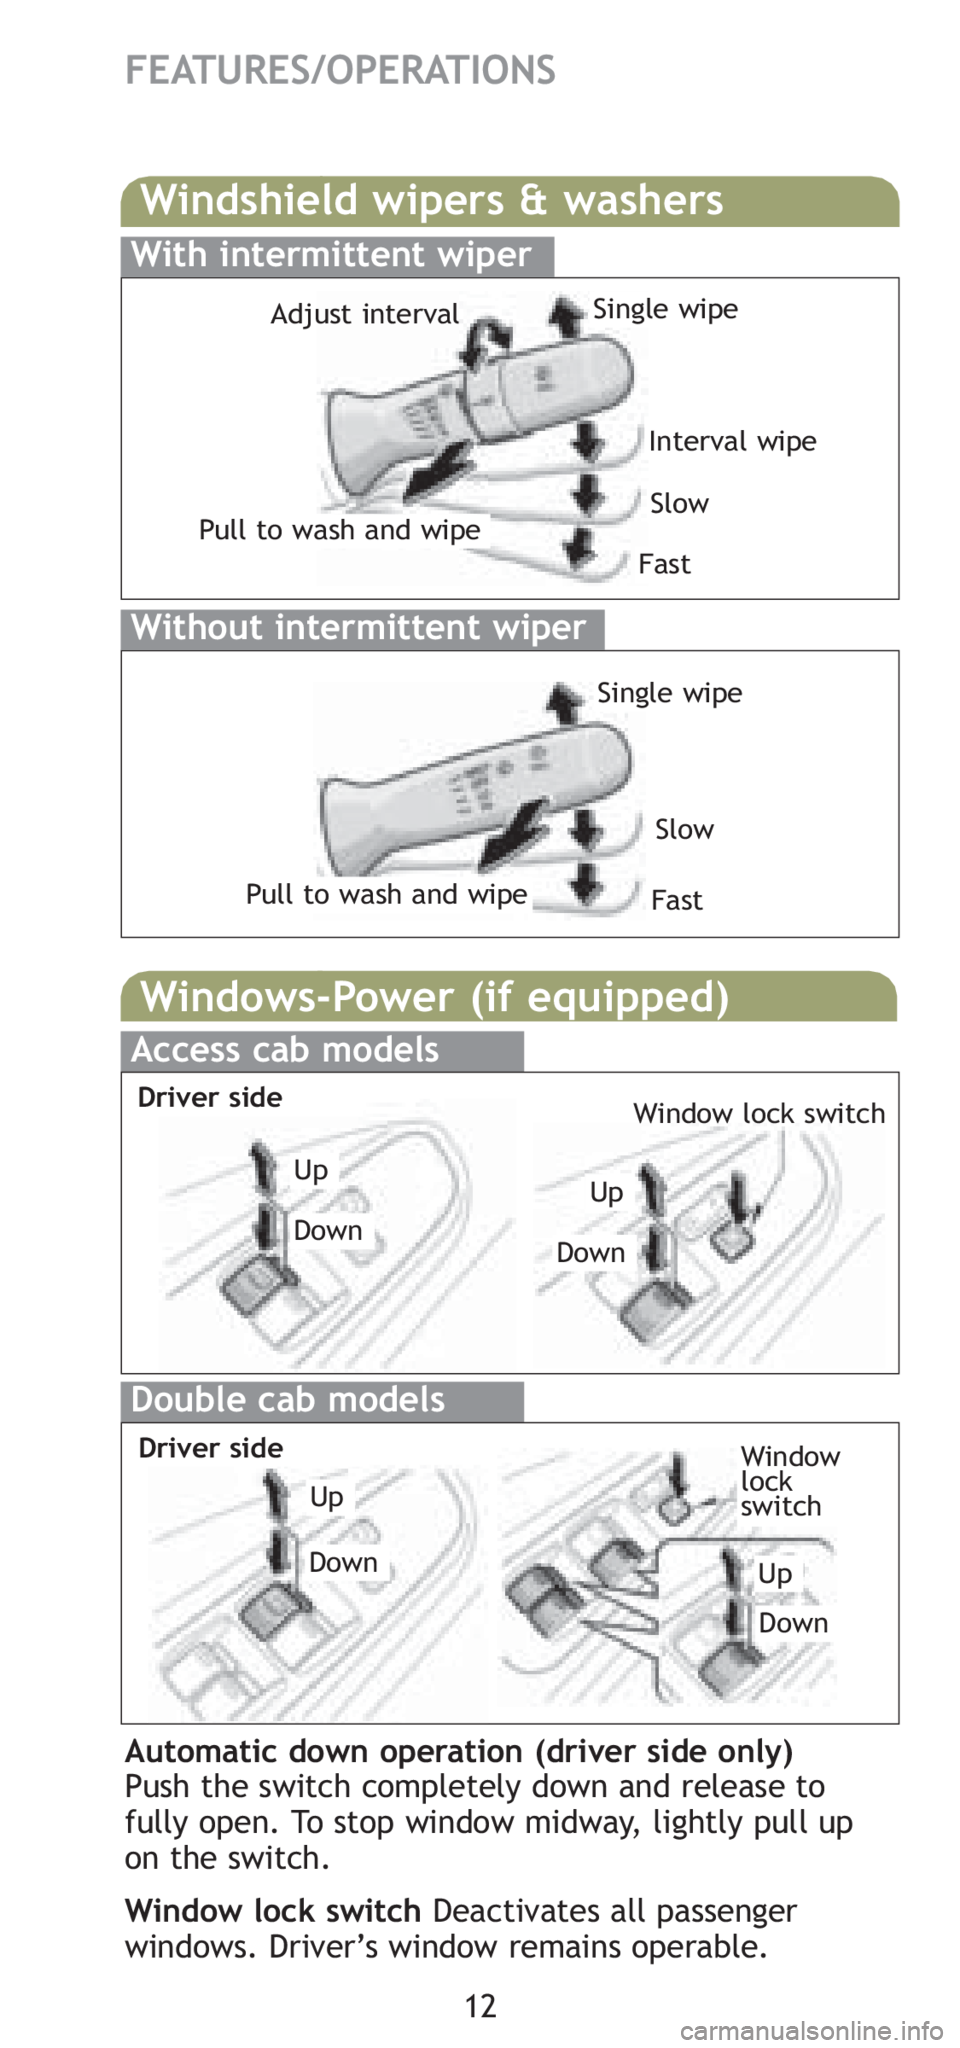 TOYOTA TACOMA 2008   (in English) User Guide 12
FEATURES/OPERATIONS
Windshield wipers & washers
Interval wipe
Single wipe
Slow
FastPull to wash and wipeAdjust interval
With intermittent wiper
Without intermittent wiper
Pull to wash and wipe
Sing